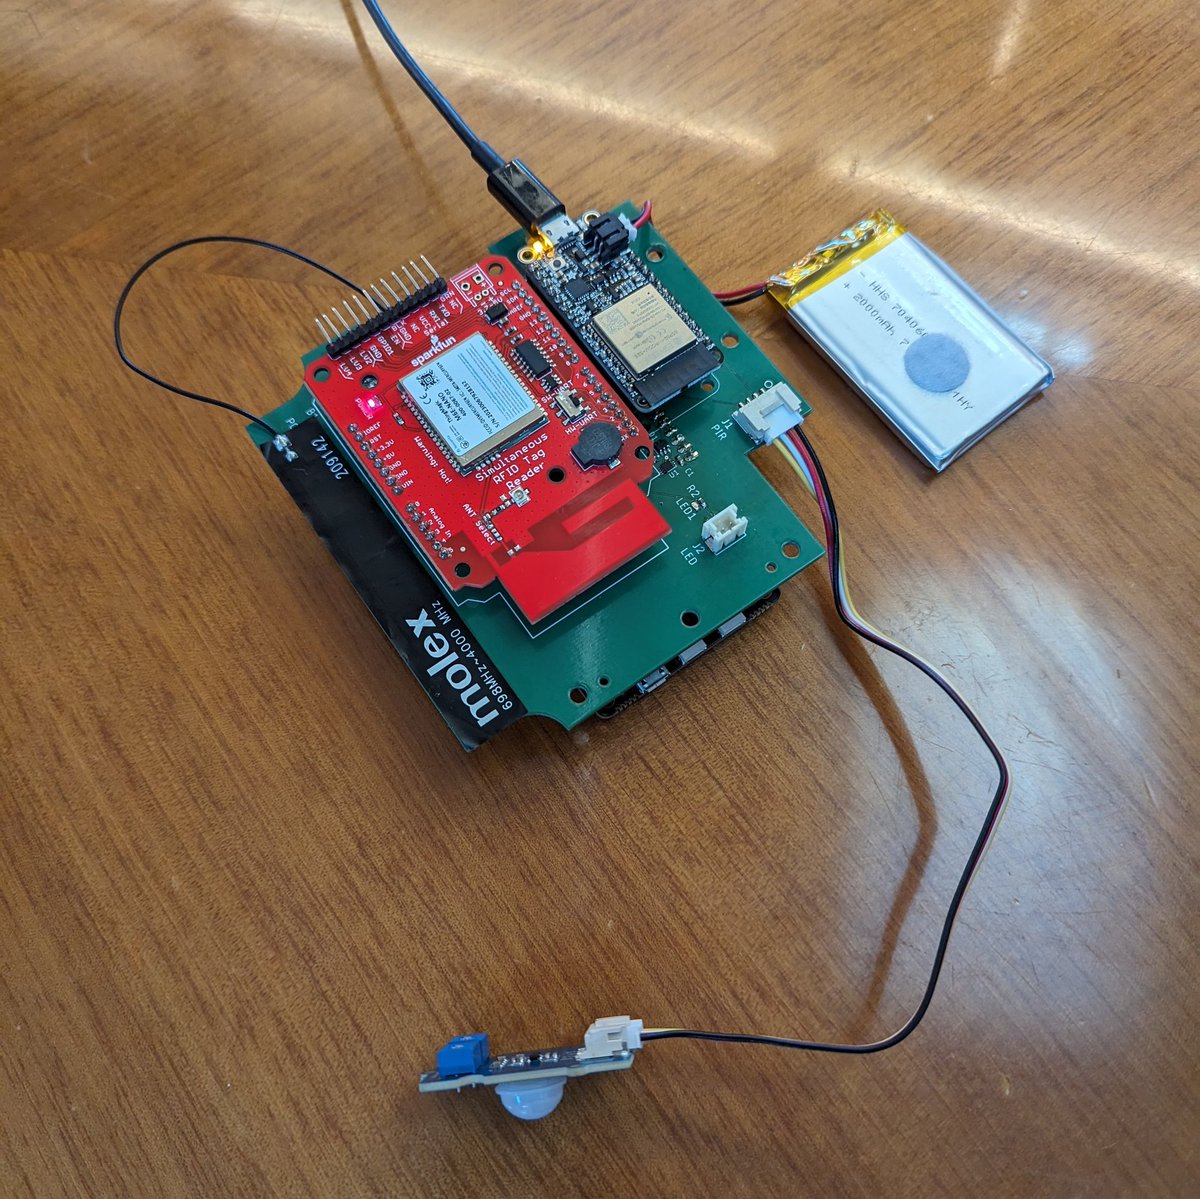 @arribada_i's latest prototype, designed for tracking aid packages in remote and hostile environments! We're using @buildwithblues for connectivity and a long range RFID scanner for picking up UHF tags/stickers on packages. All running on @ZephyrIoT RTOS!